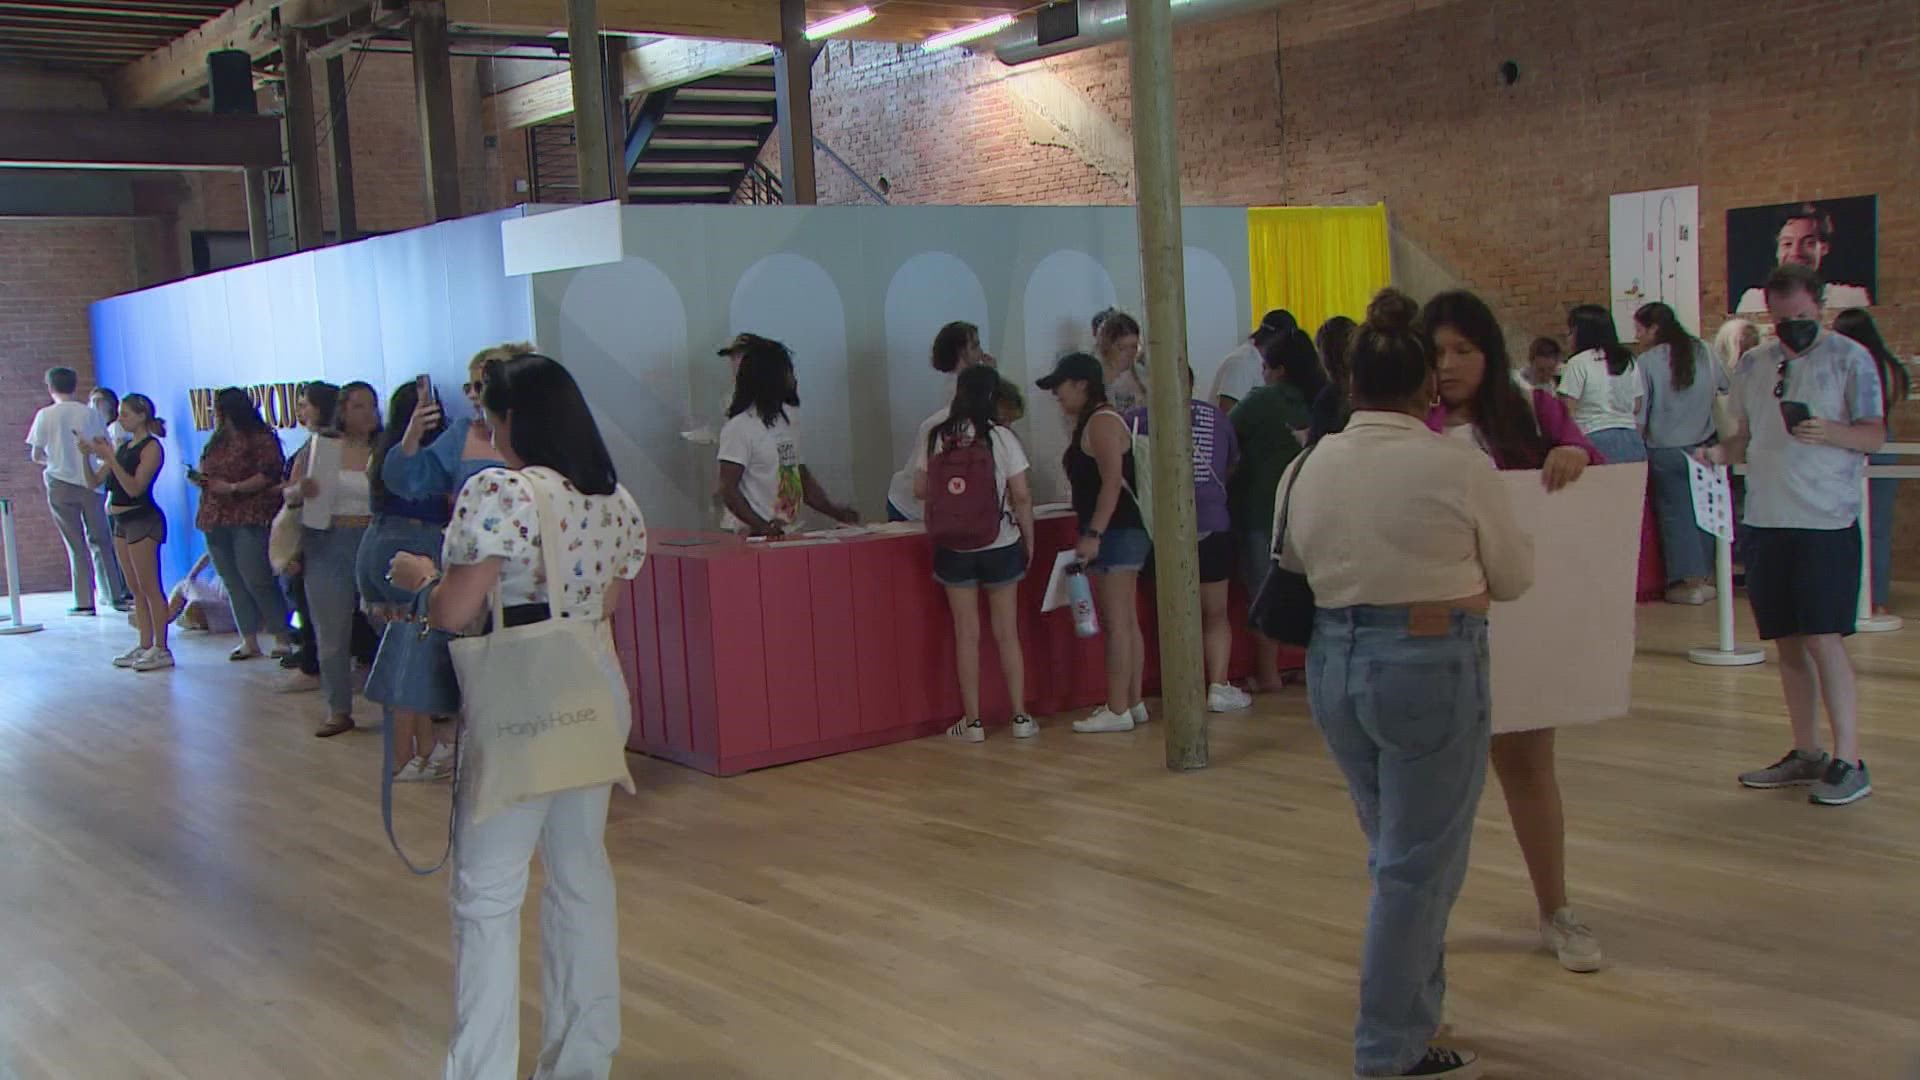 Fans of pop star Harry Styles waited hours ahead of the opening of his pop-up shop in Dallas.